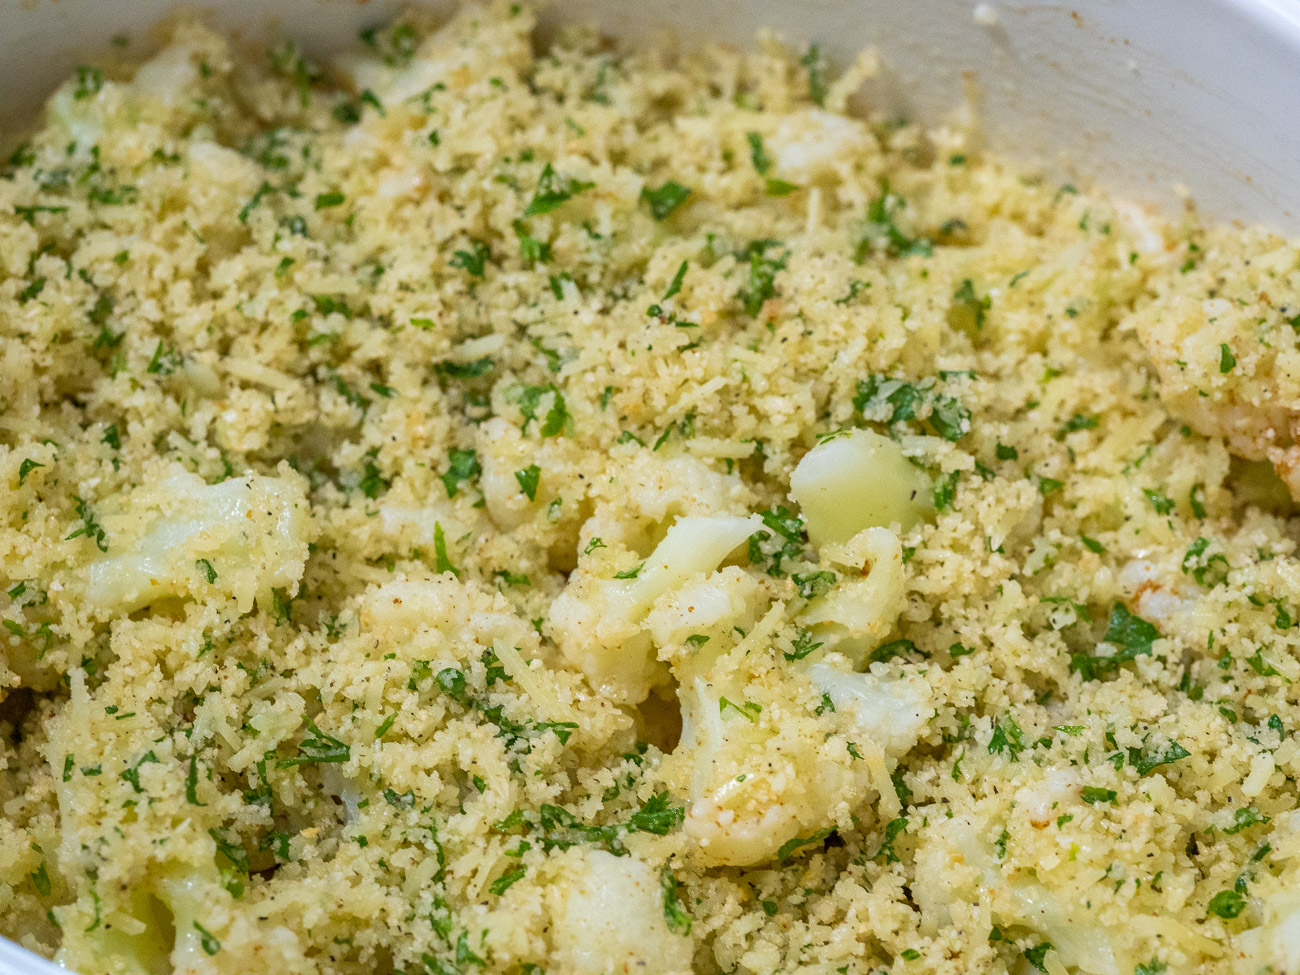 Pour cauliflower onto deep baking pan or casserole dish. Pour butter over top and then cover with buttered breadcrumbs. Bake for 10-15 minutes or until cauliflower begins to brown on top.